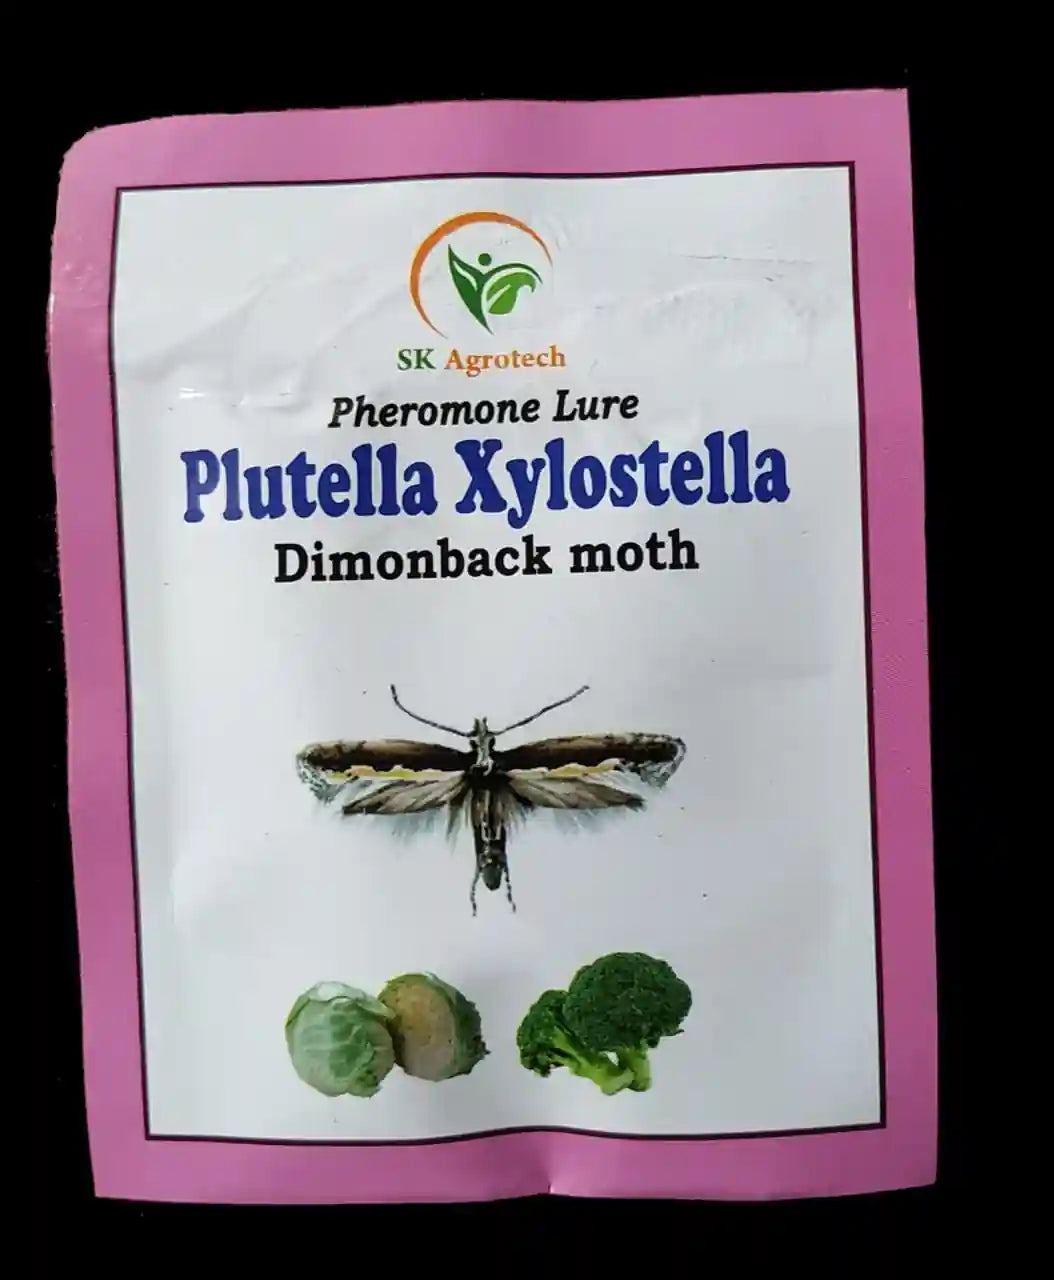 SK Agrotech Pheromone Funnel Trap With Plutella xylostella Lure1